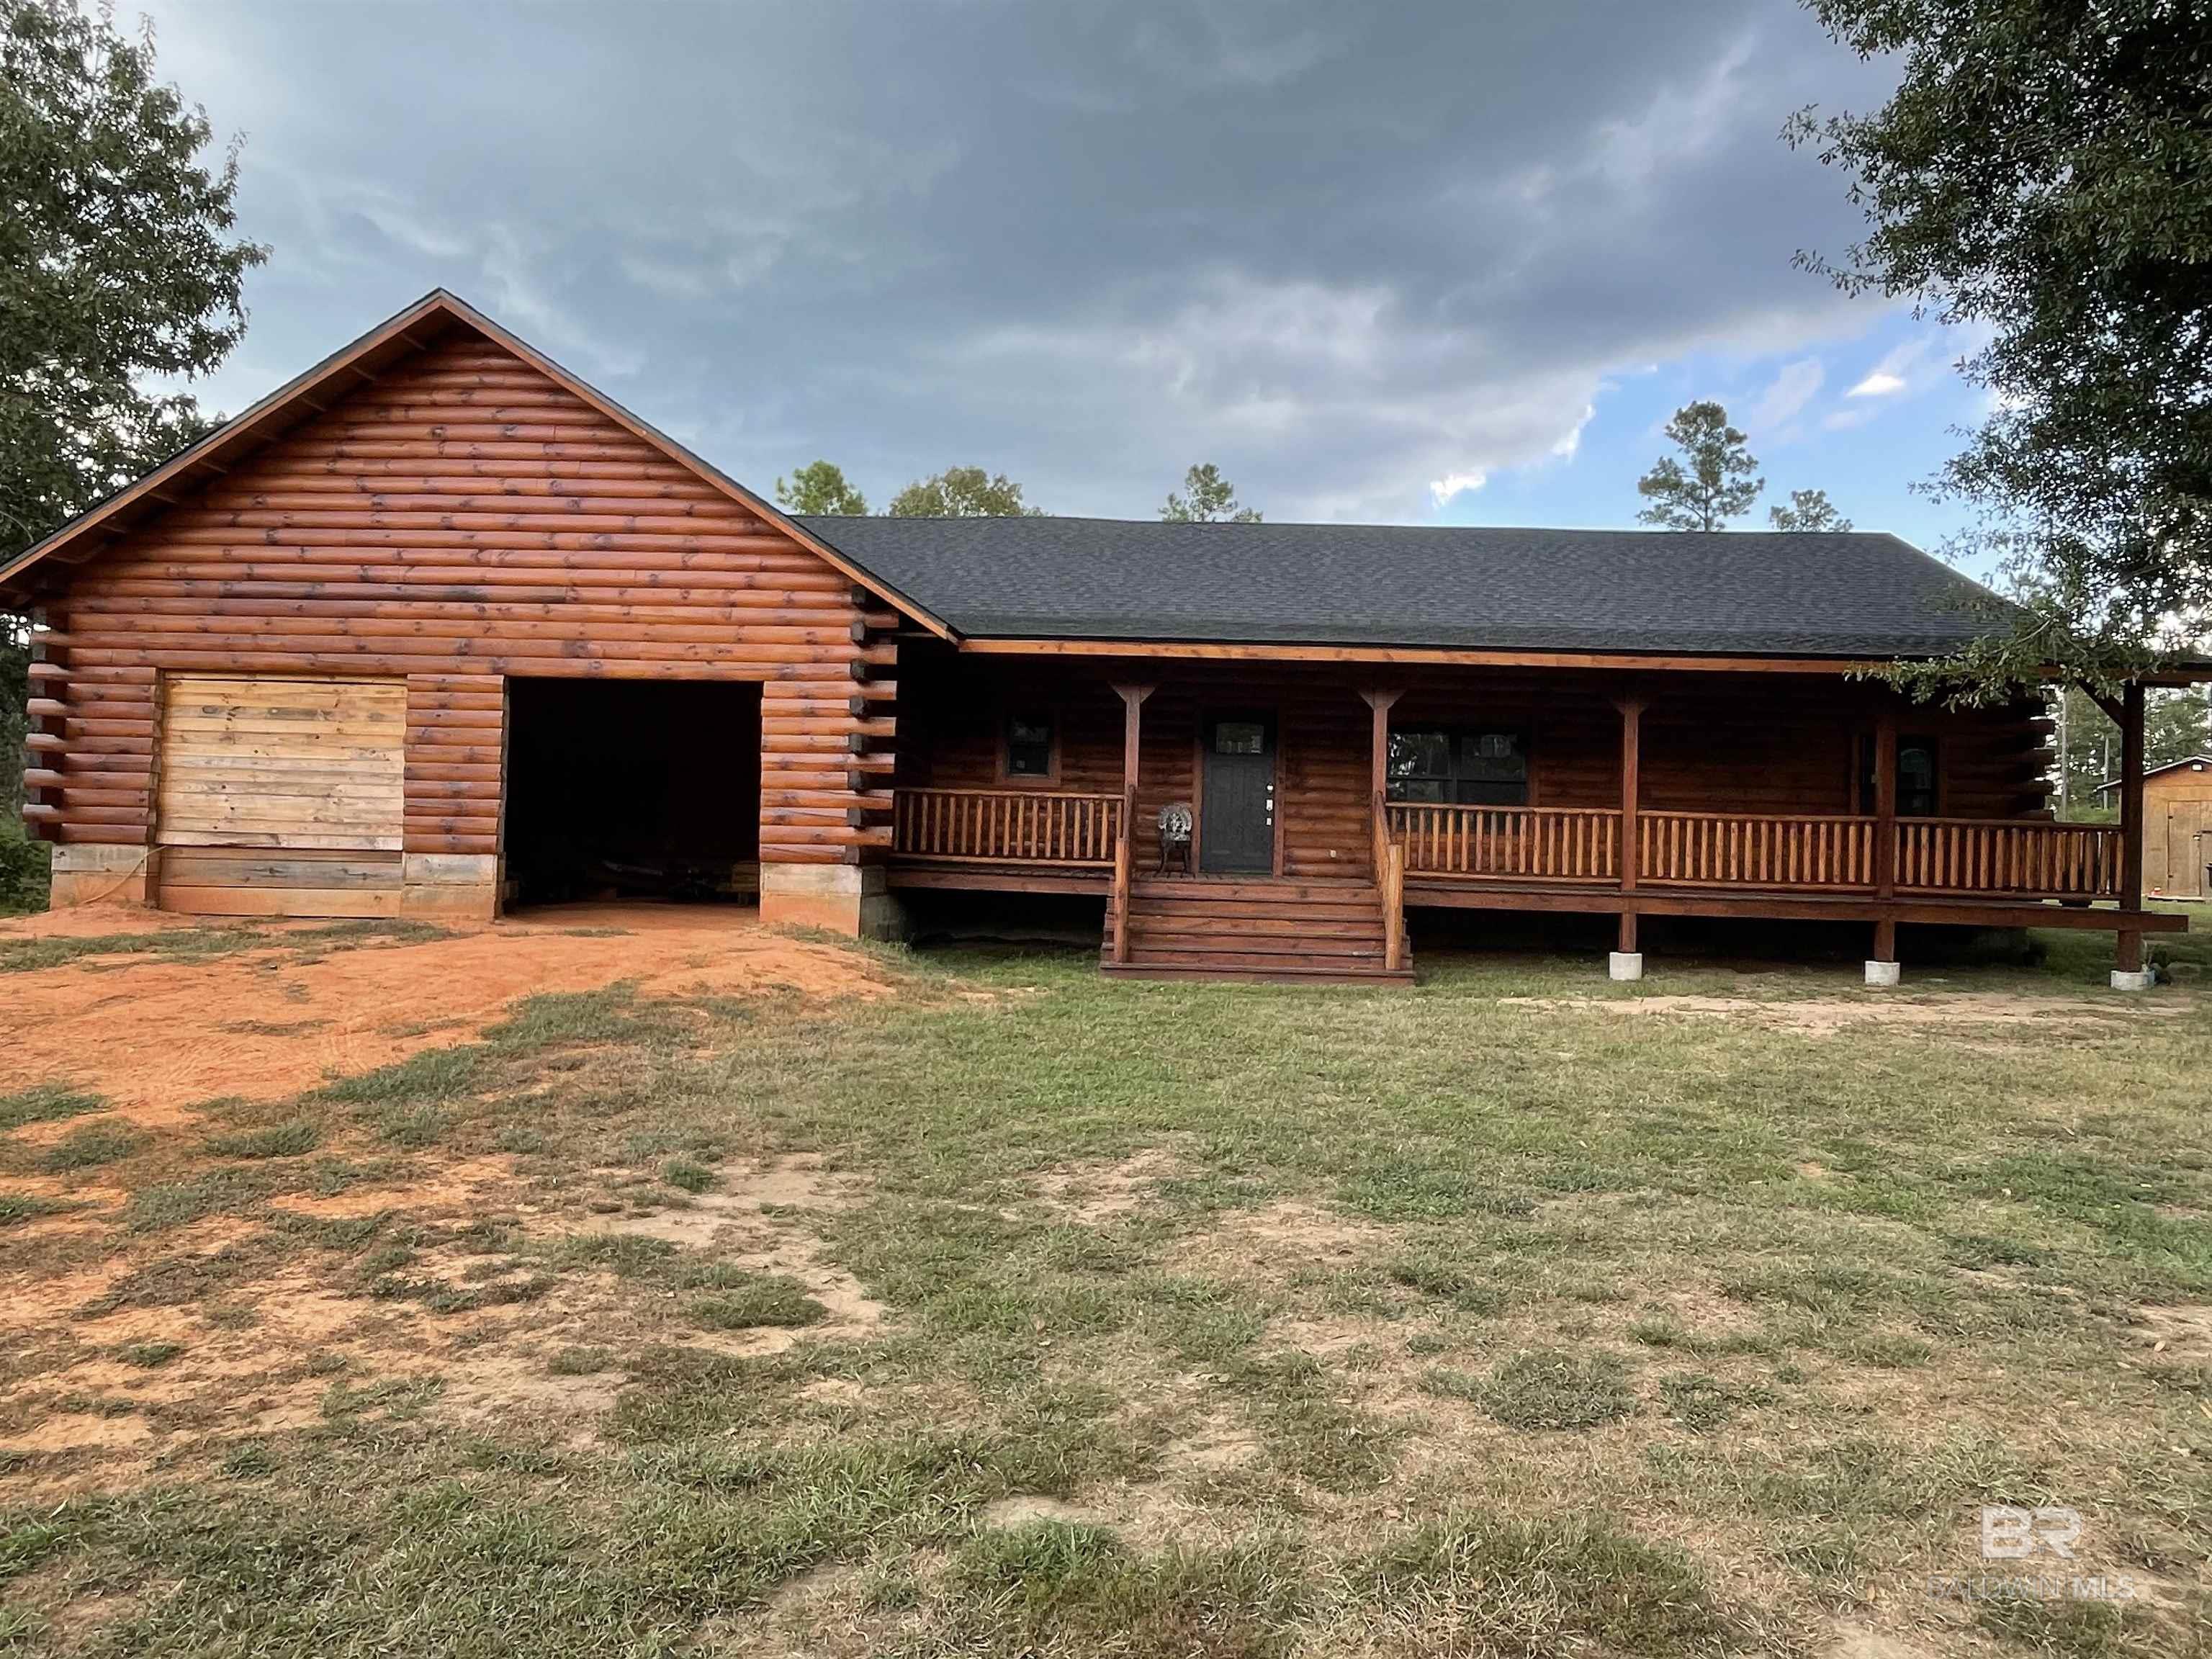 30303County Road 64 Extension Robertsdale, AL |  Photo